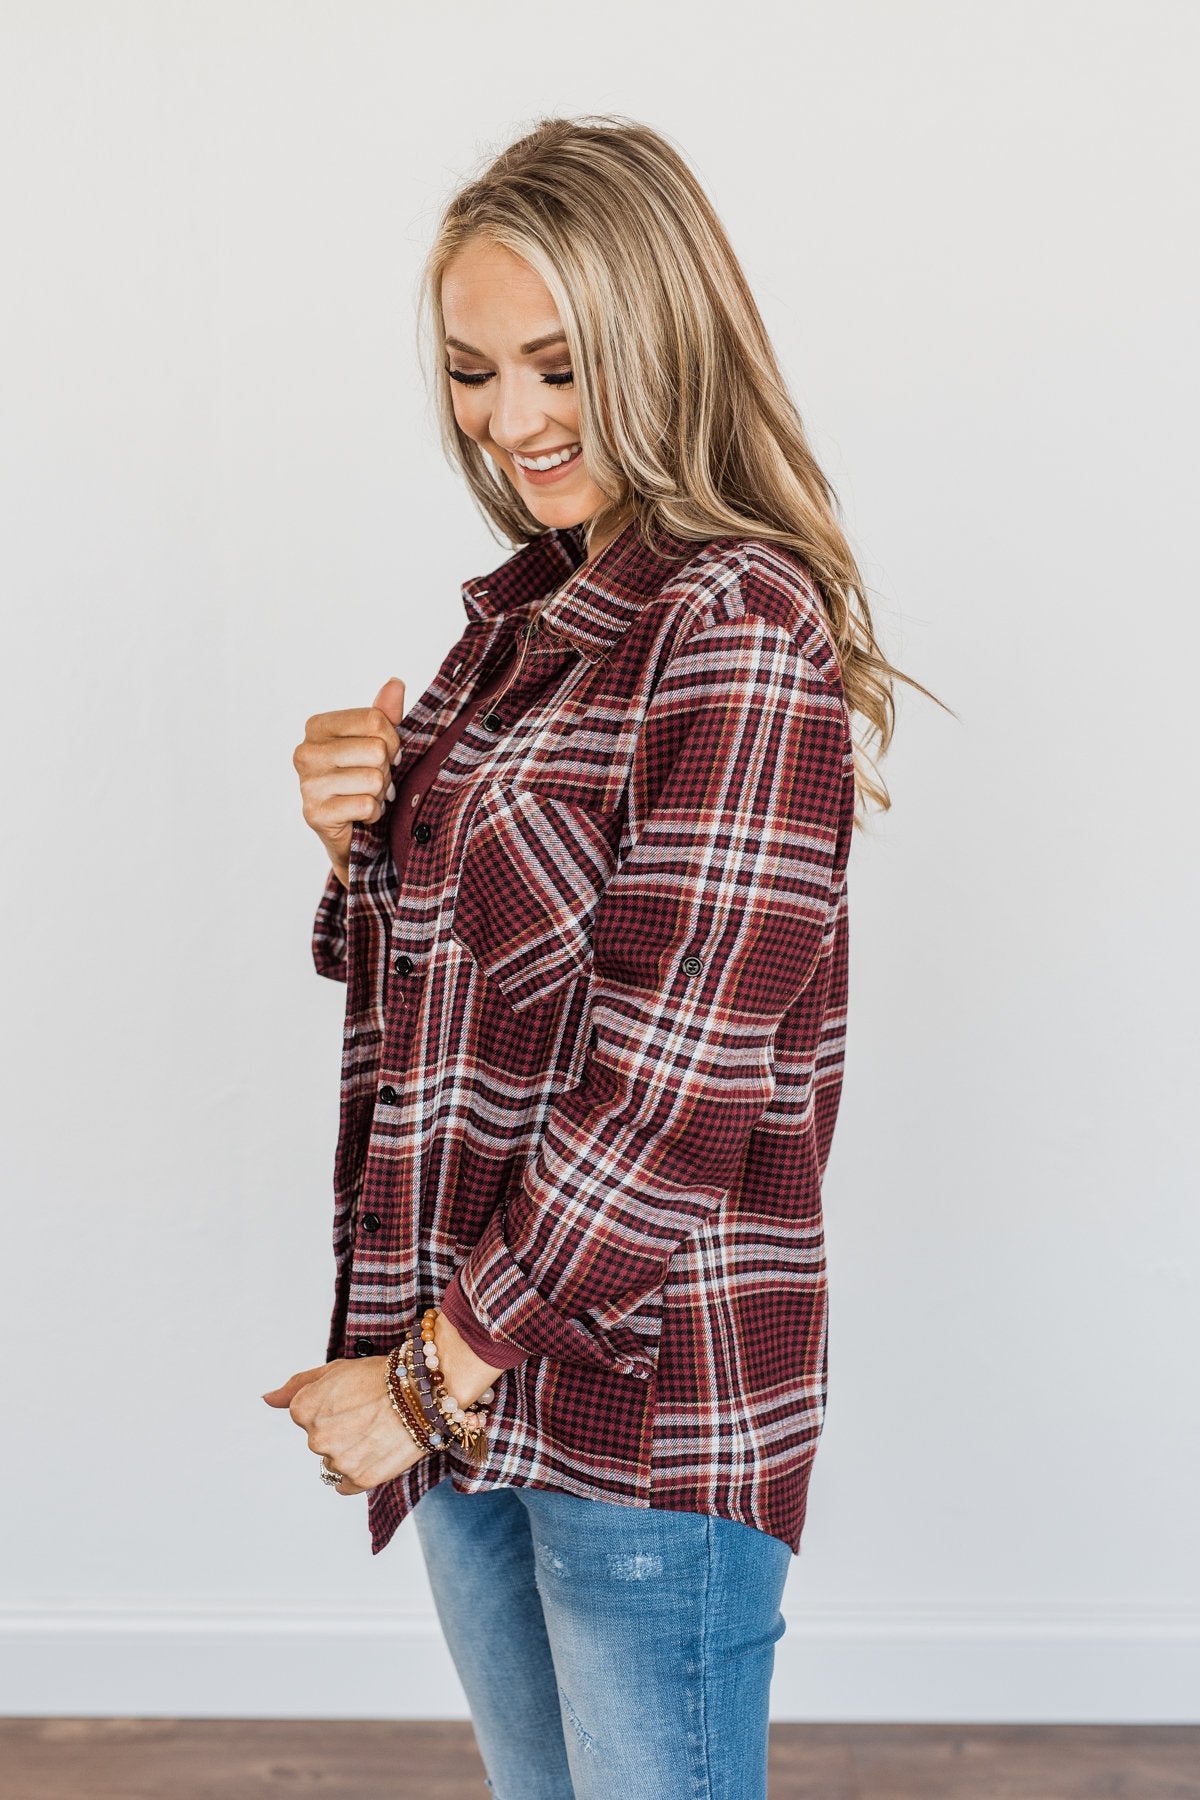 Made Up My Mind Plaid Button Top- Burgundy, Camel & Ivory – The Pulse ...